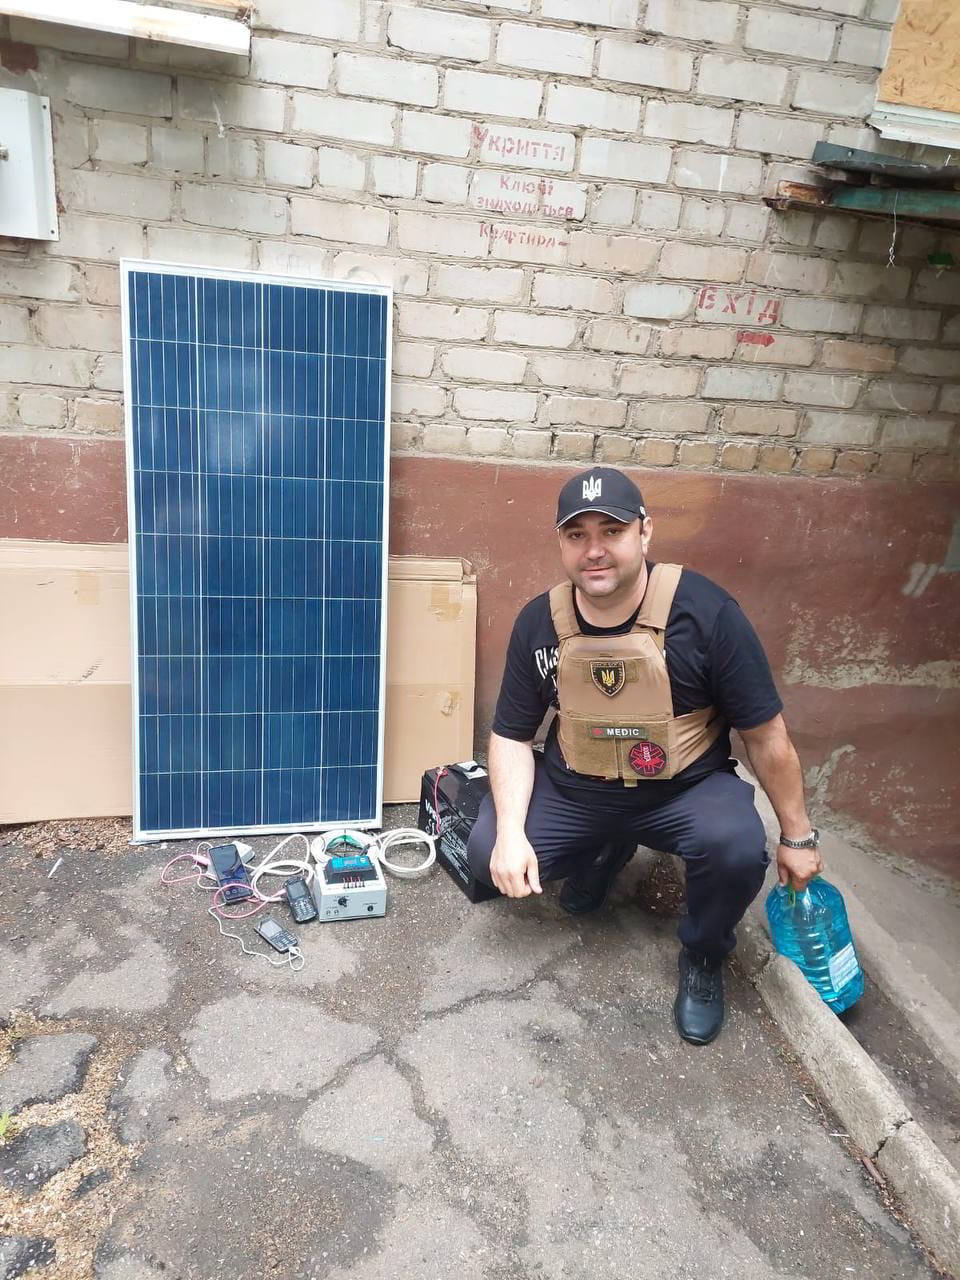  Churches in Ukraine are using portable solar-powered "survival systems" to bring relief and hope to those without electricity.